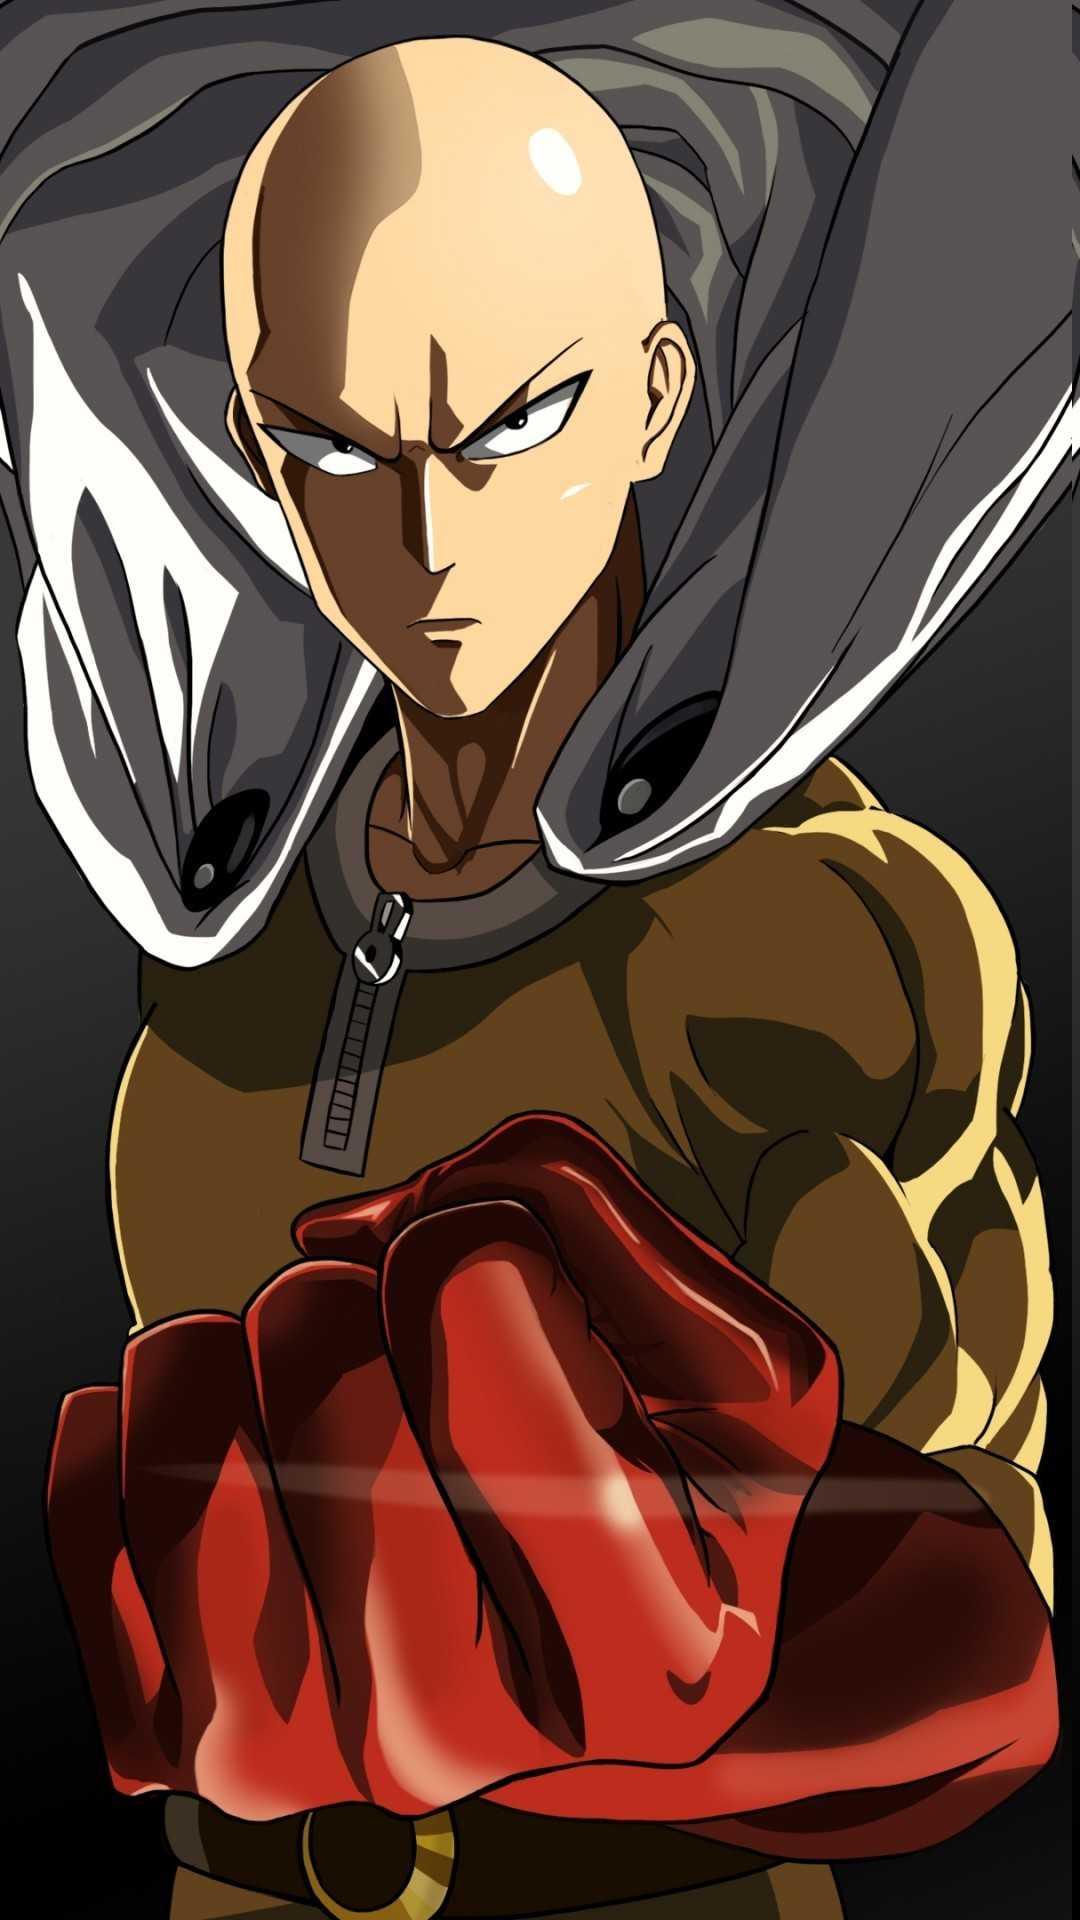 1080 x 1920 · jpeg - iPhone One Punch Man Wallpaper - KoLPaPer - Awesome Free HD Wallpapers